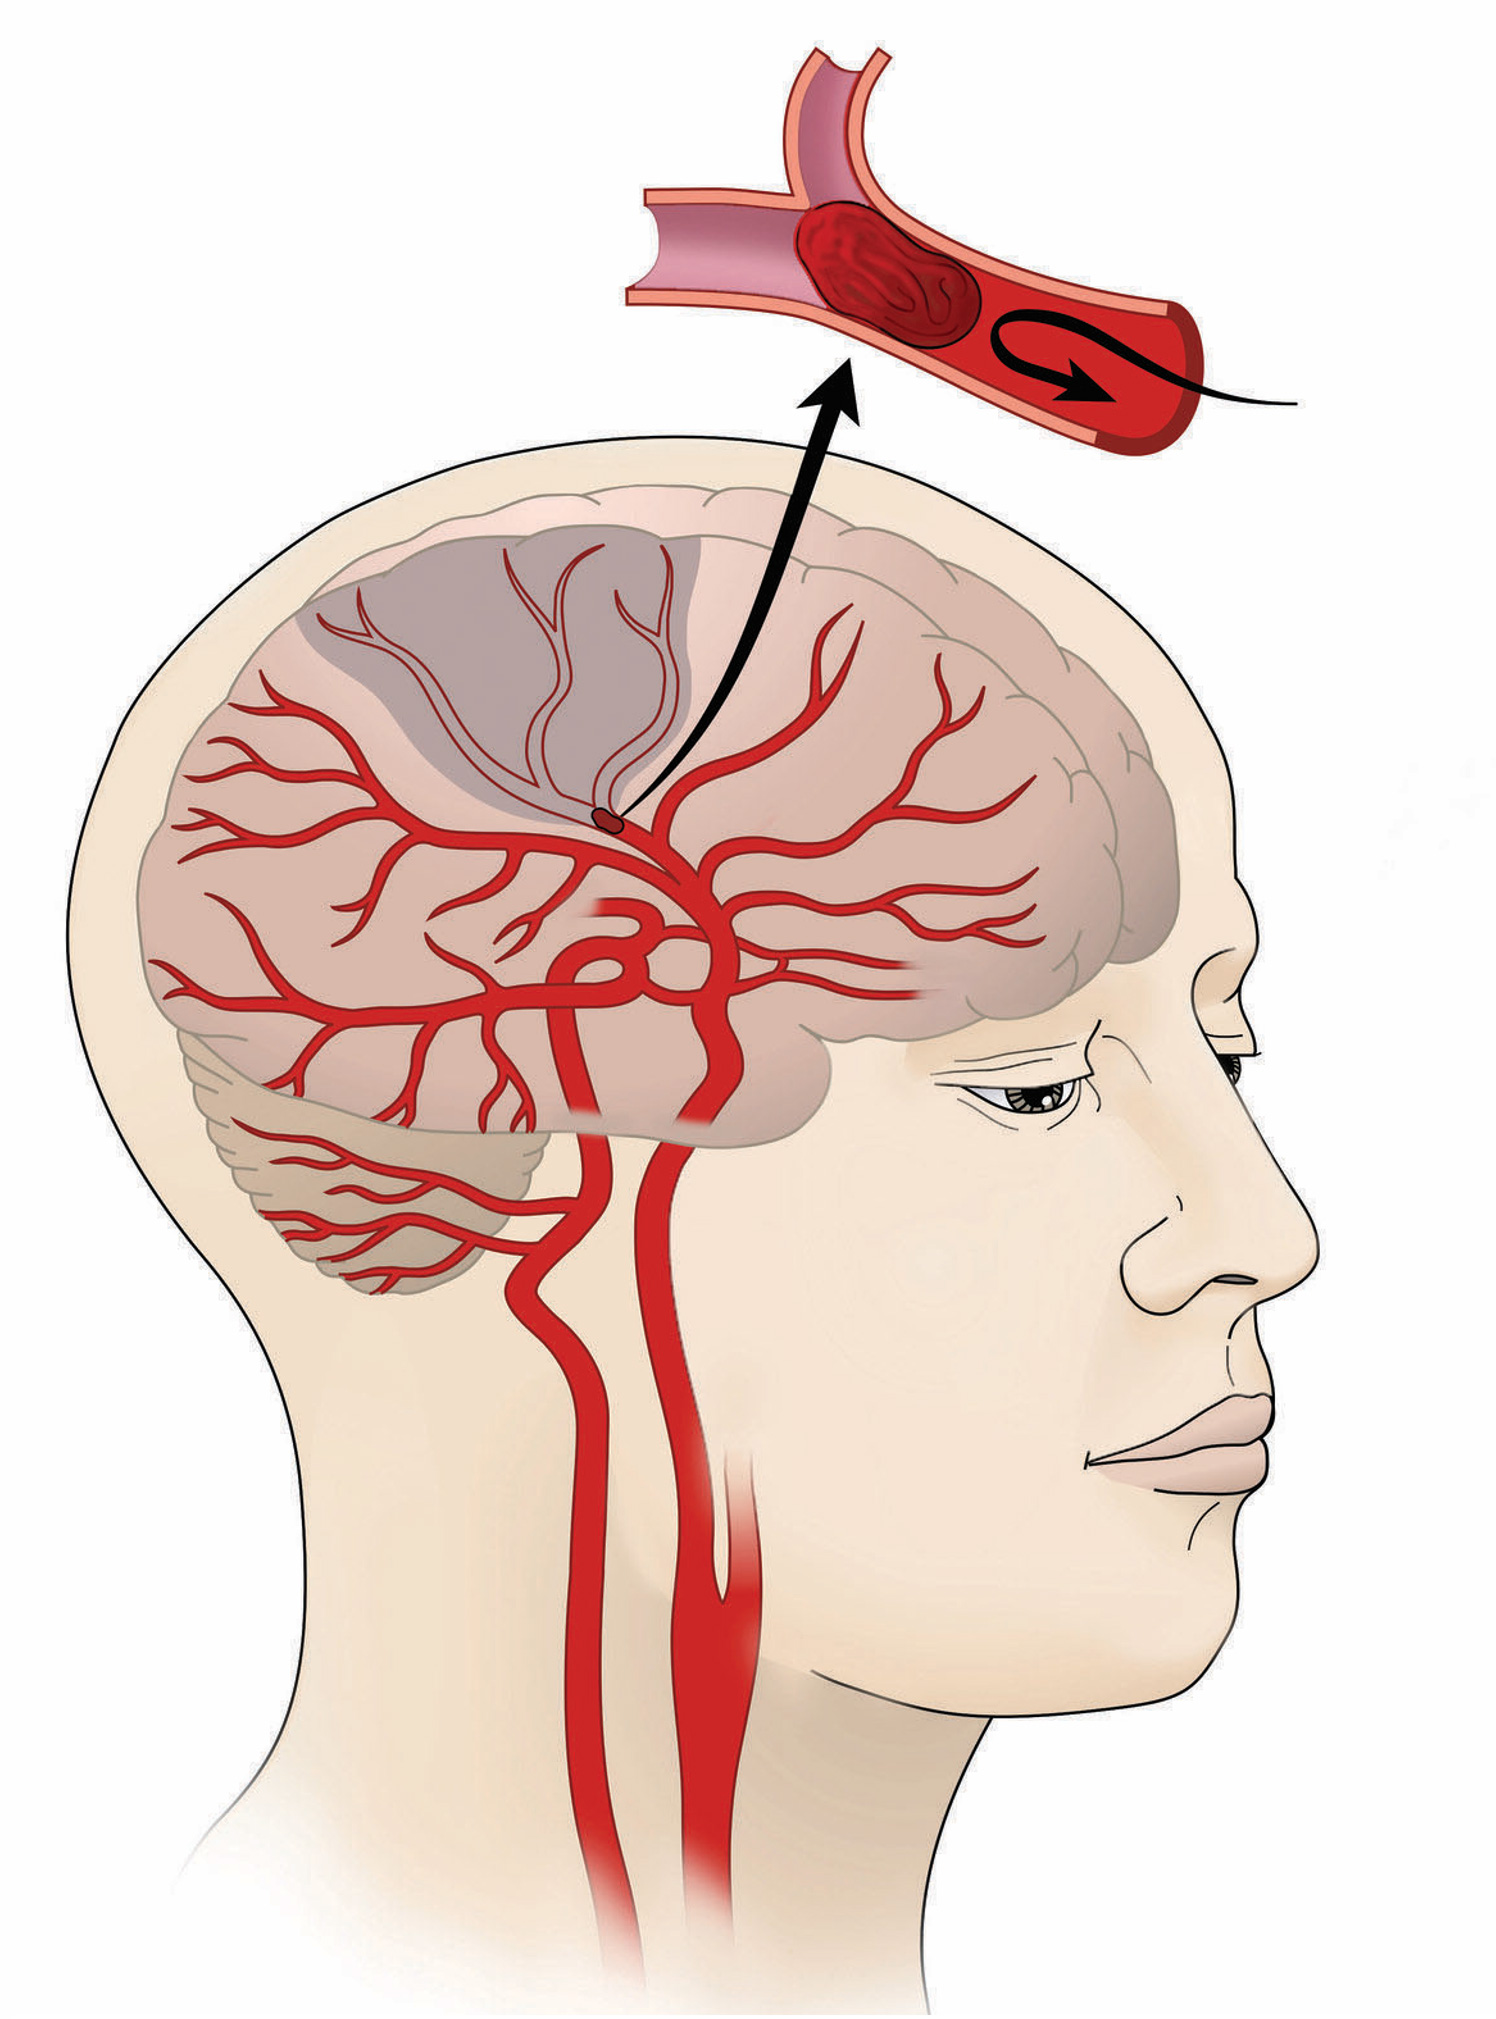 A stroke occurs when a blood vessel in the brain becomes blocked by a blood clot. 